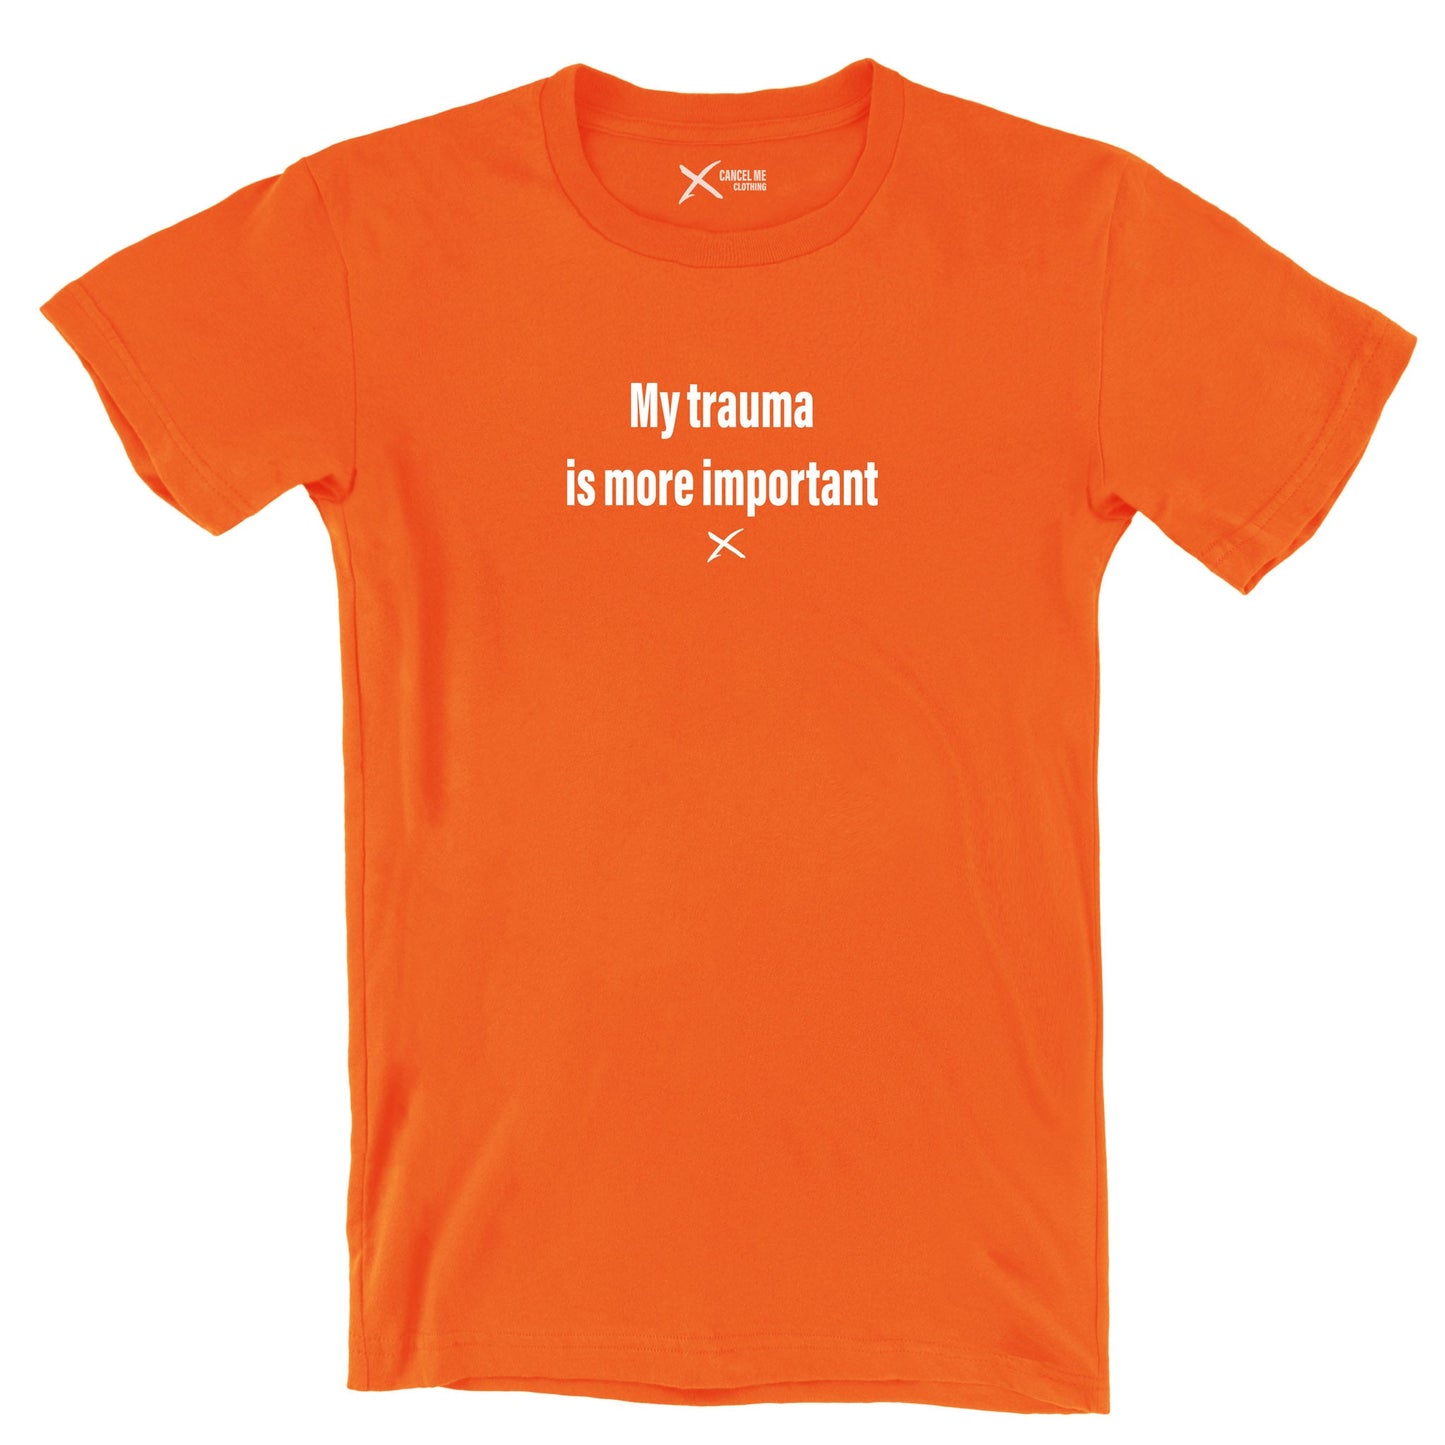 My trauma is more important - Shirt